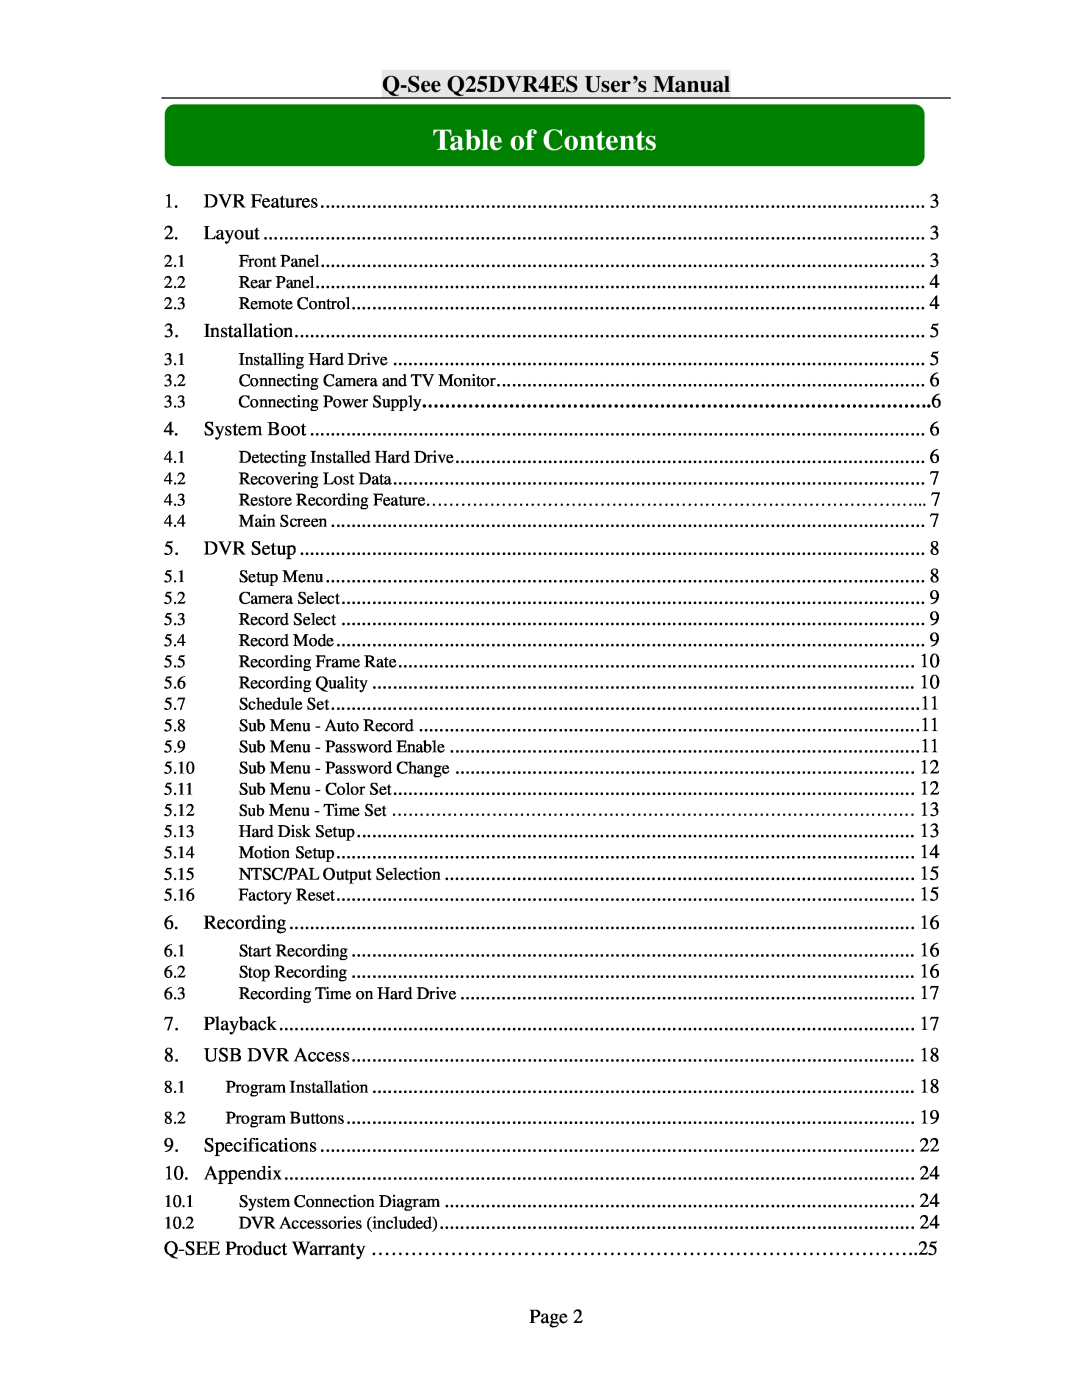 Q-See user manual Table of Contents, Q-SeeQ25DVR4ES User’s Manual 